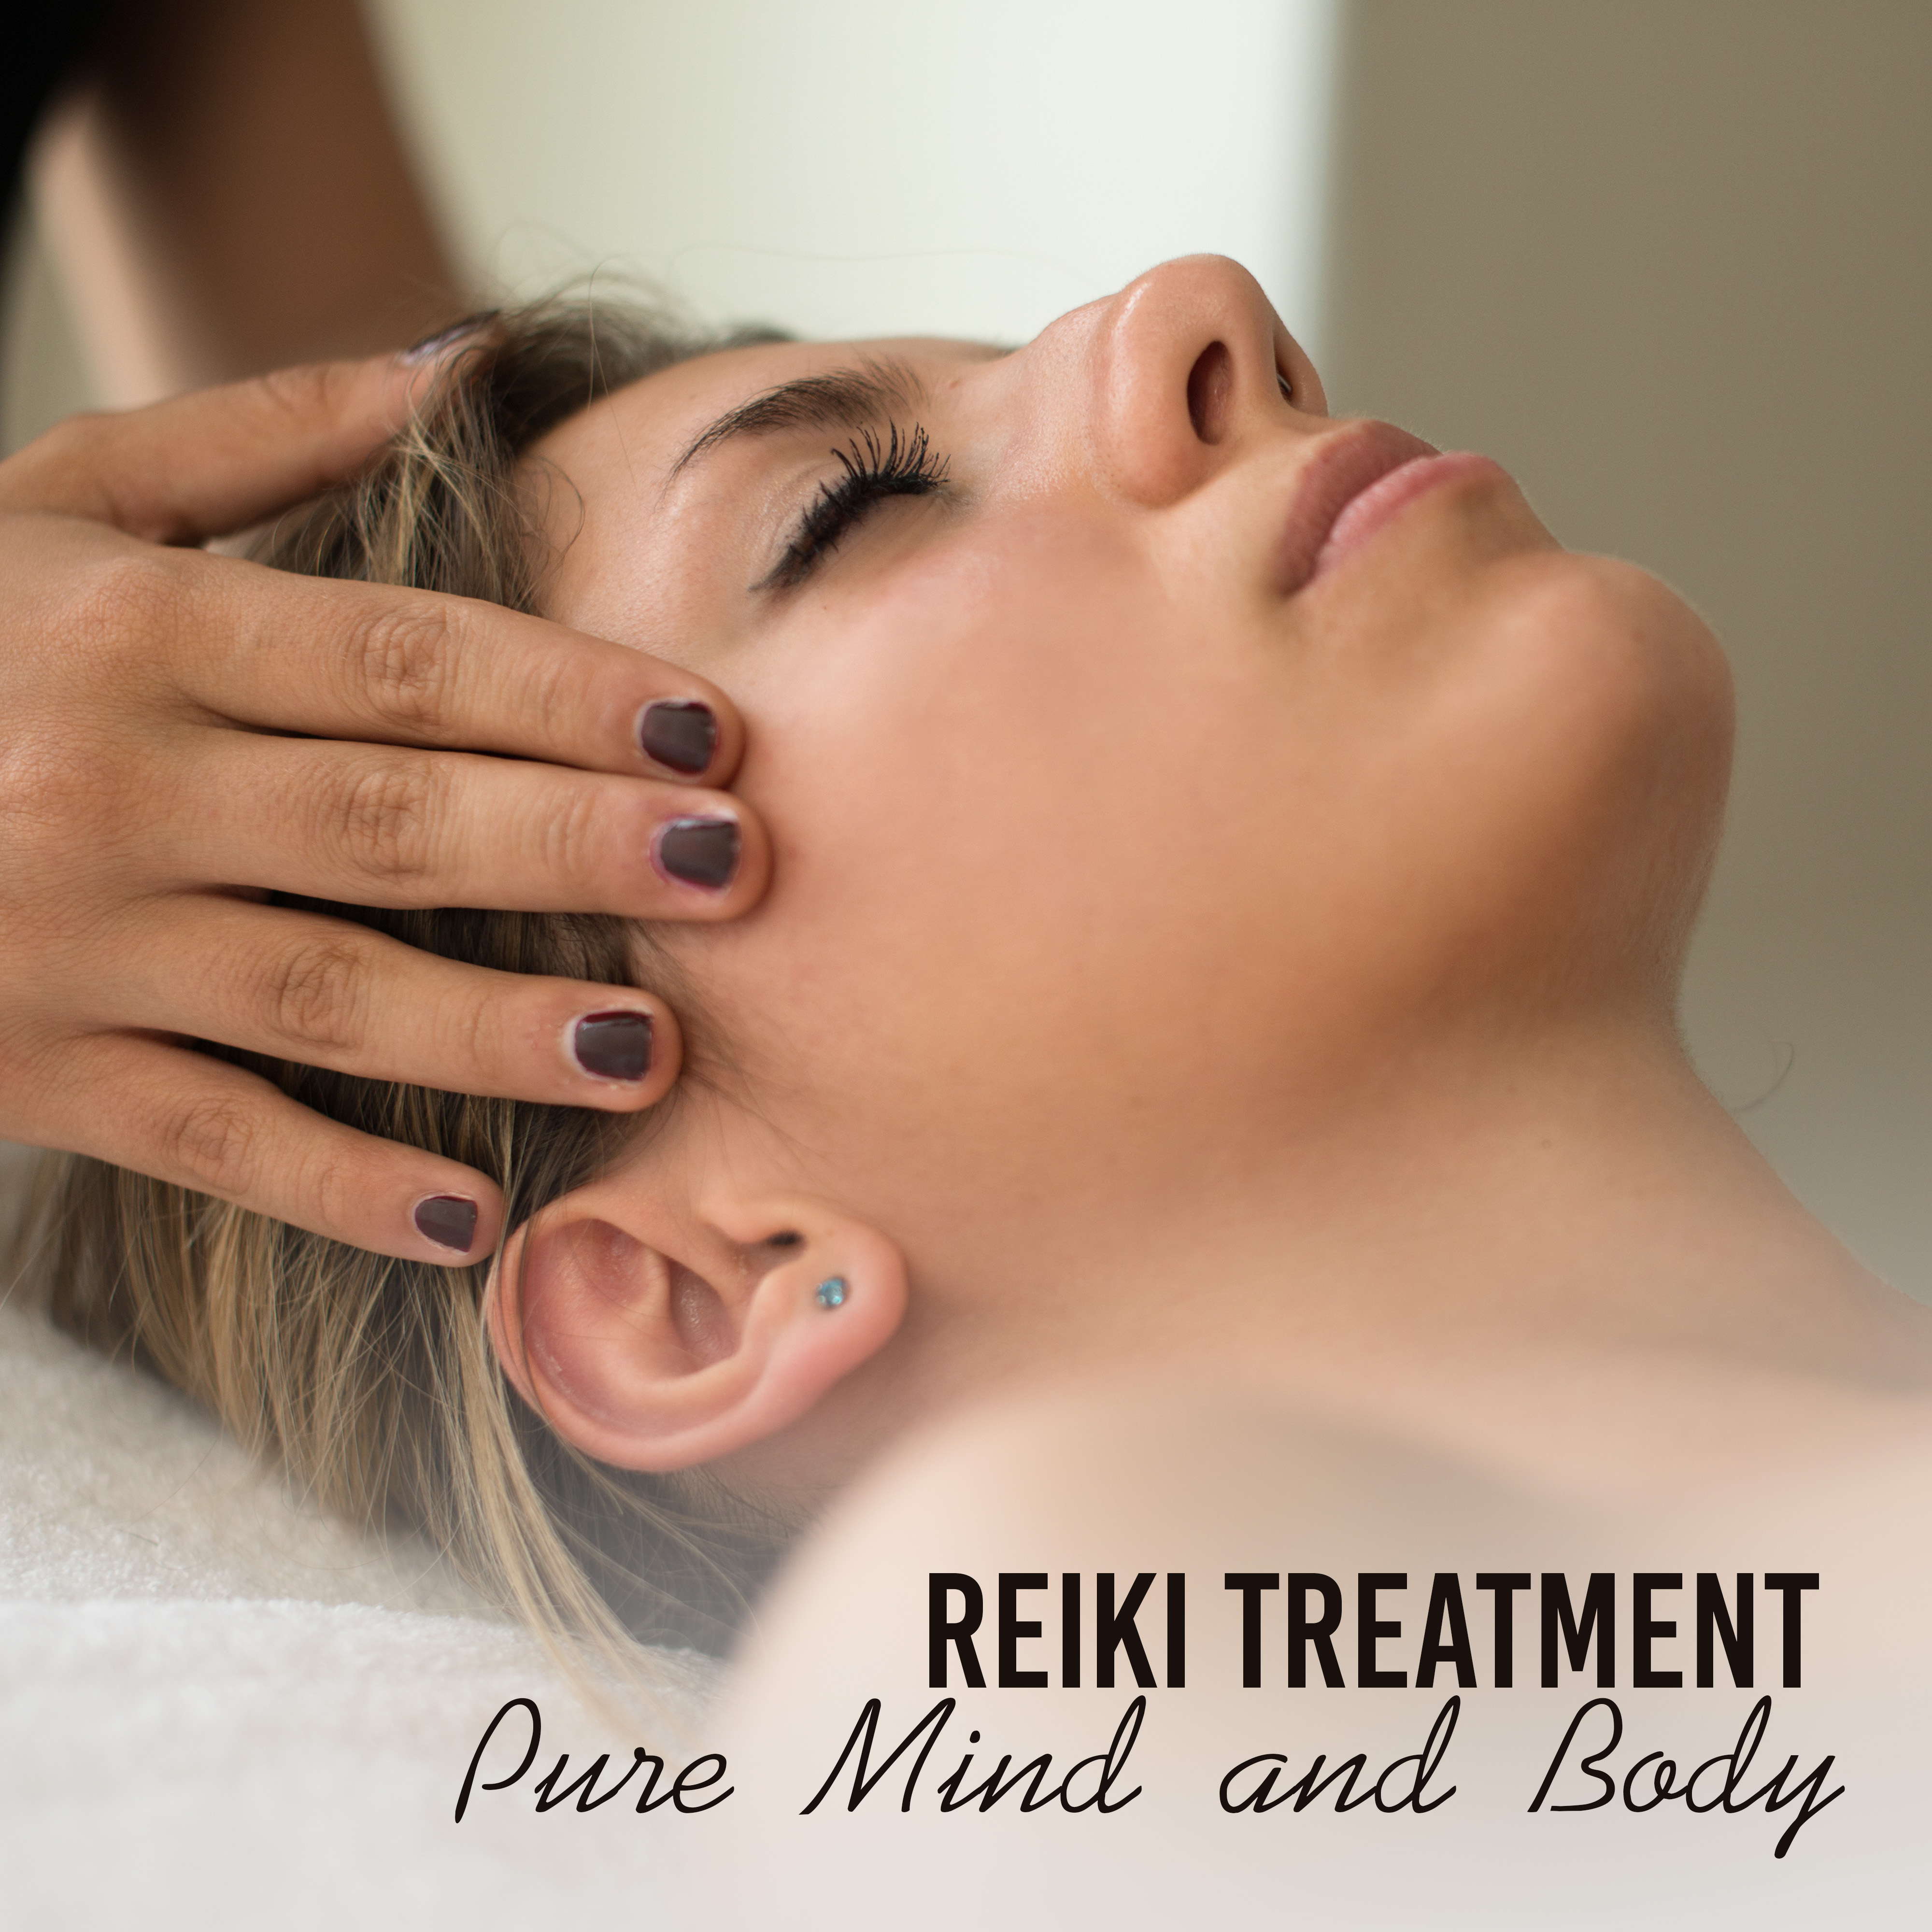 Reiki Treatment: Pure Mind and Body